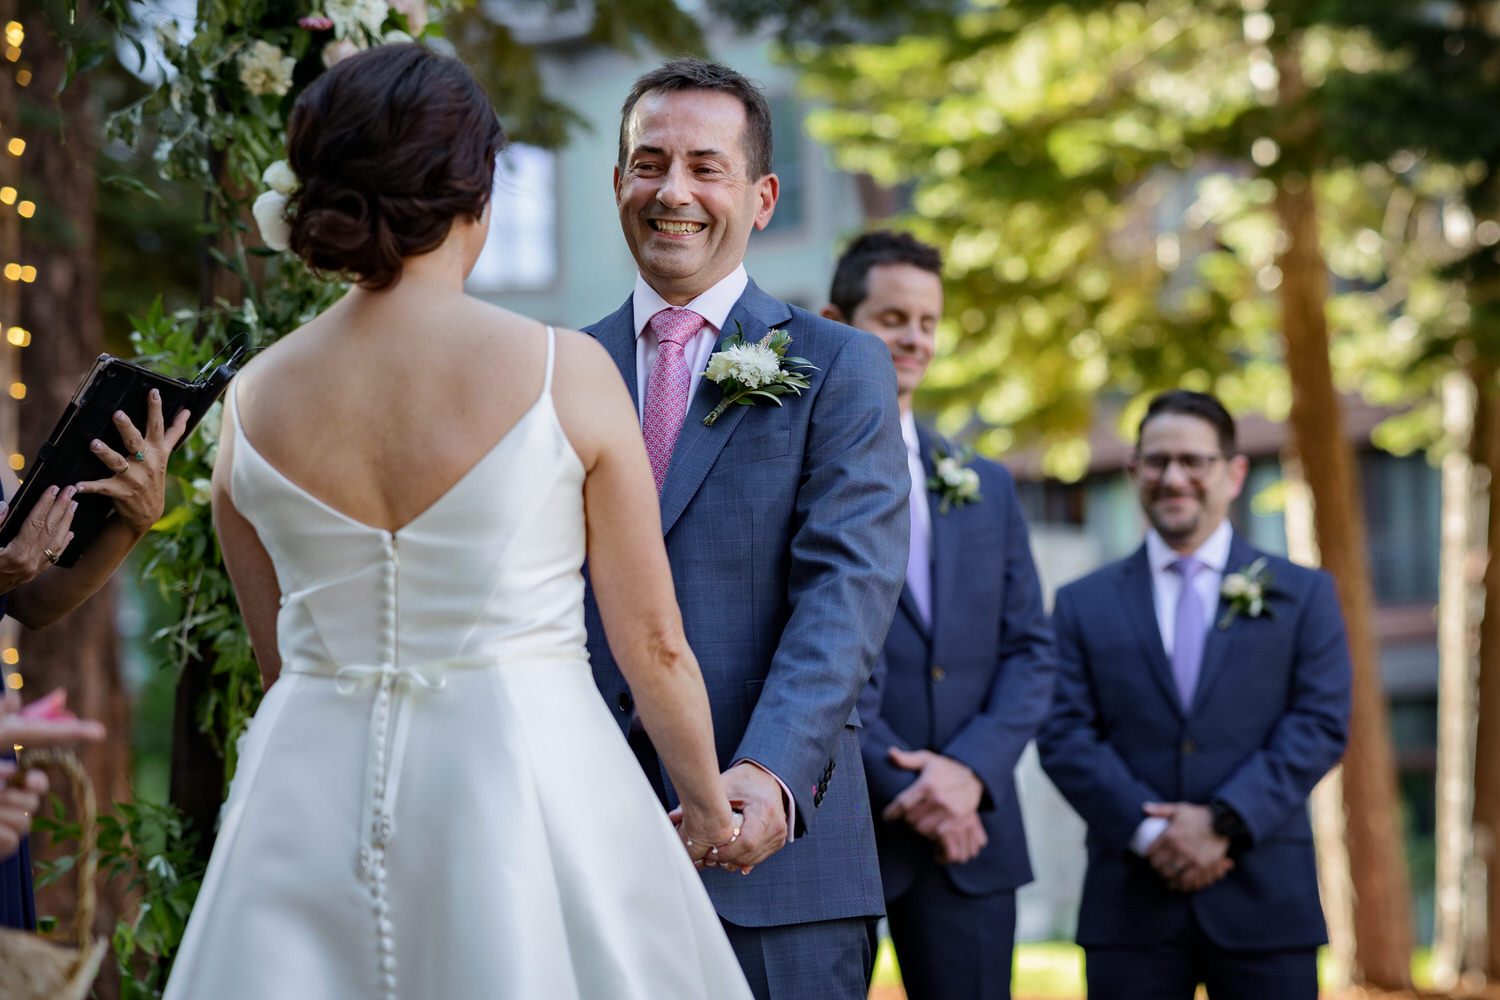 A smiling groom with his bride at The Woods, an outdoor ceremony venue at the Ritz Carlton.